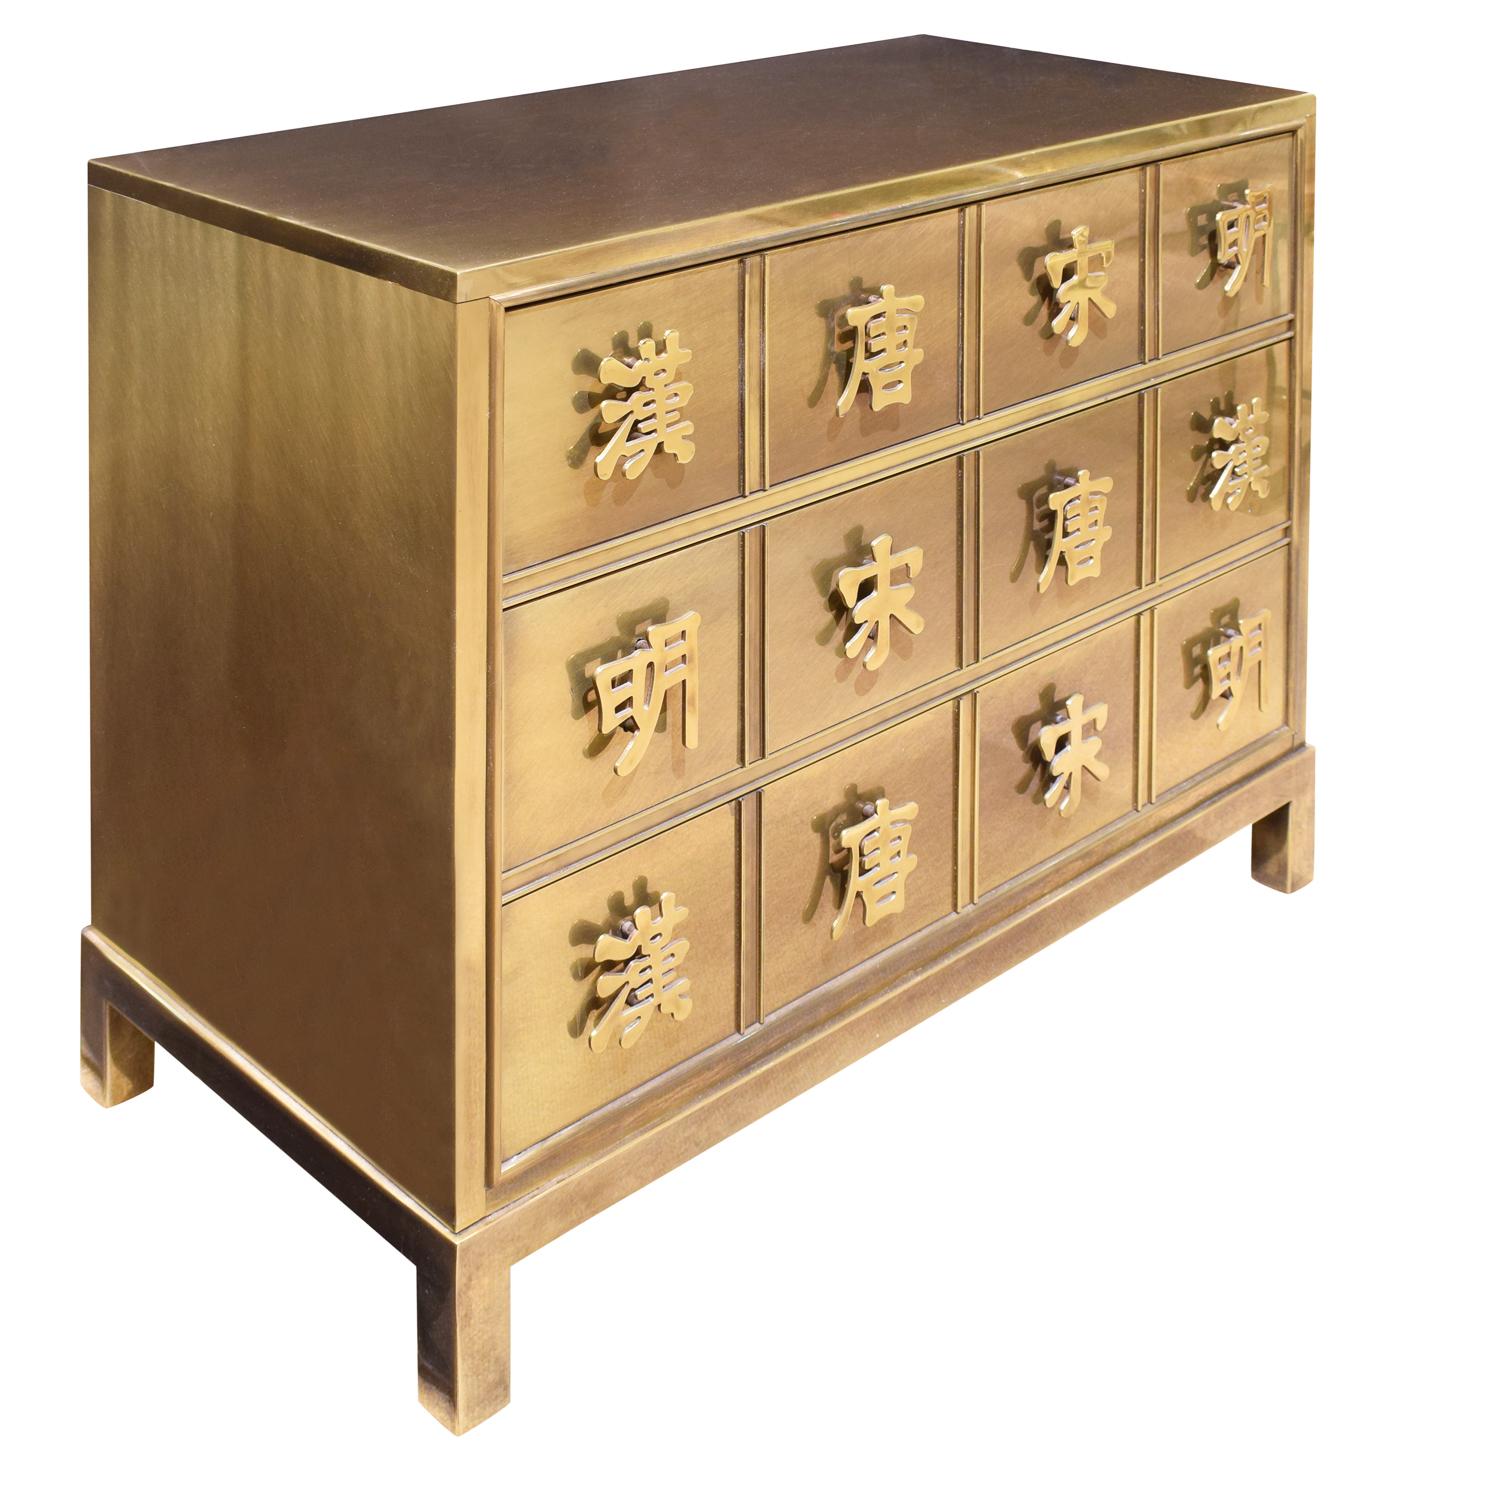 Chest of drawers in polished bronze with raised Chinese characters as pulls by Mastercraft, American, 1970's (signed with Mastercraft label on back).